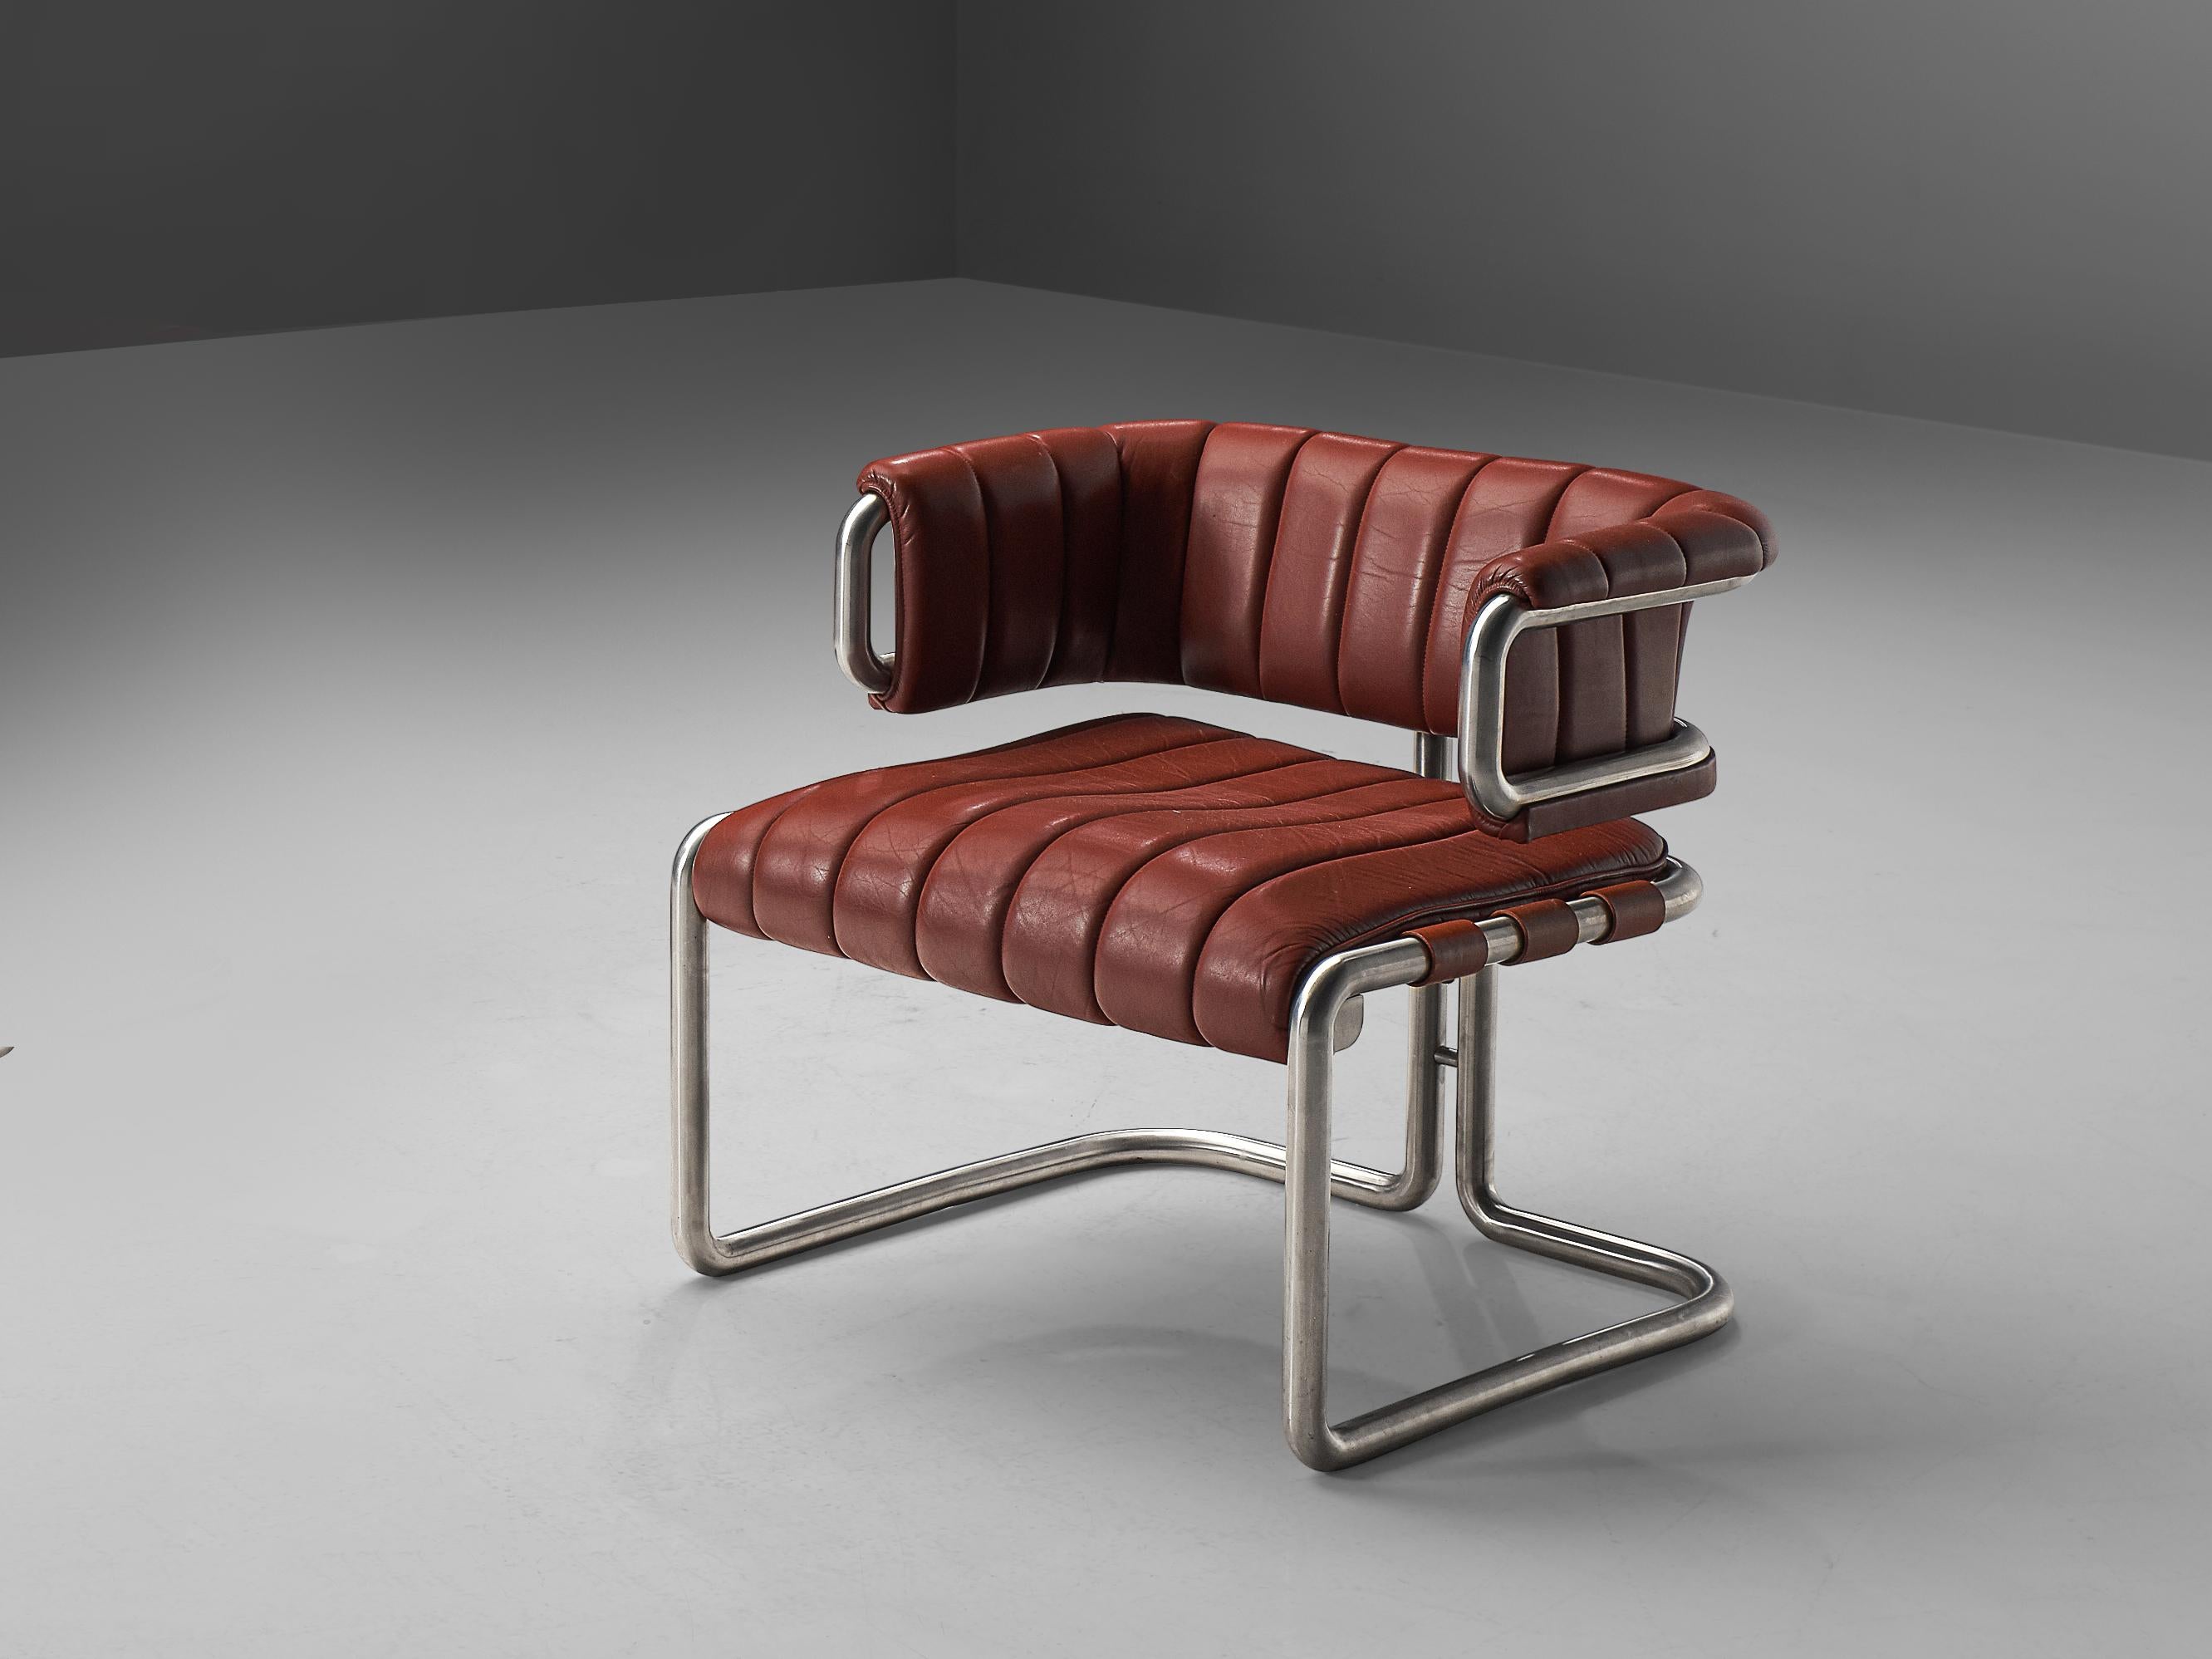 Lounge chair, red leather, tubular steel, Germany, 1960s

This chair is characterized by clear, straight lines that are noticeable in the leather as well. The tubular frame is made out of stainless steel and shows beautiful forms. In the back two